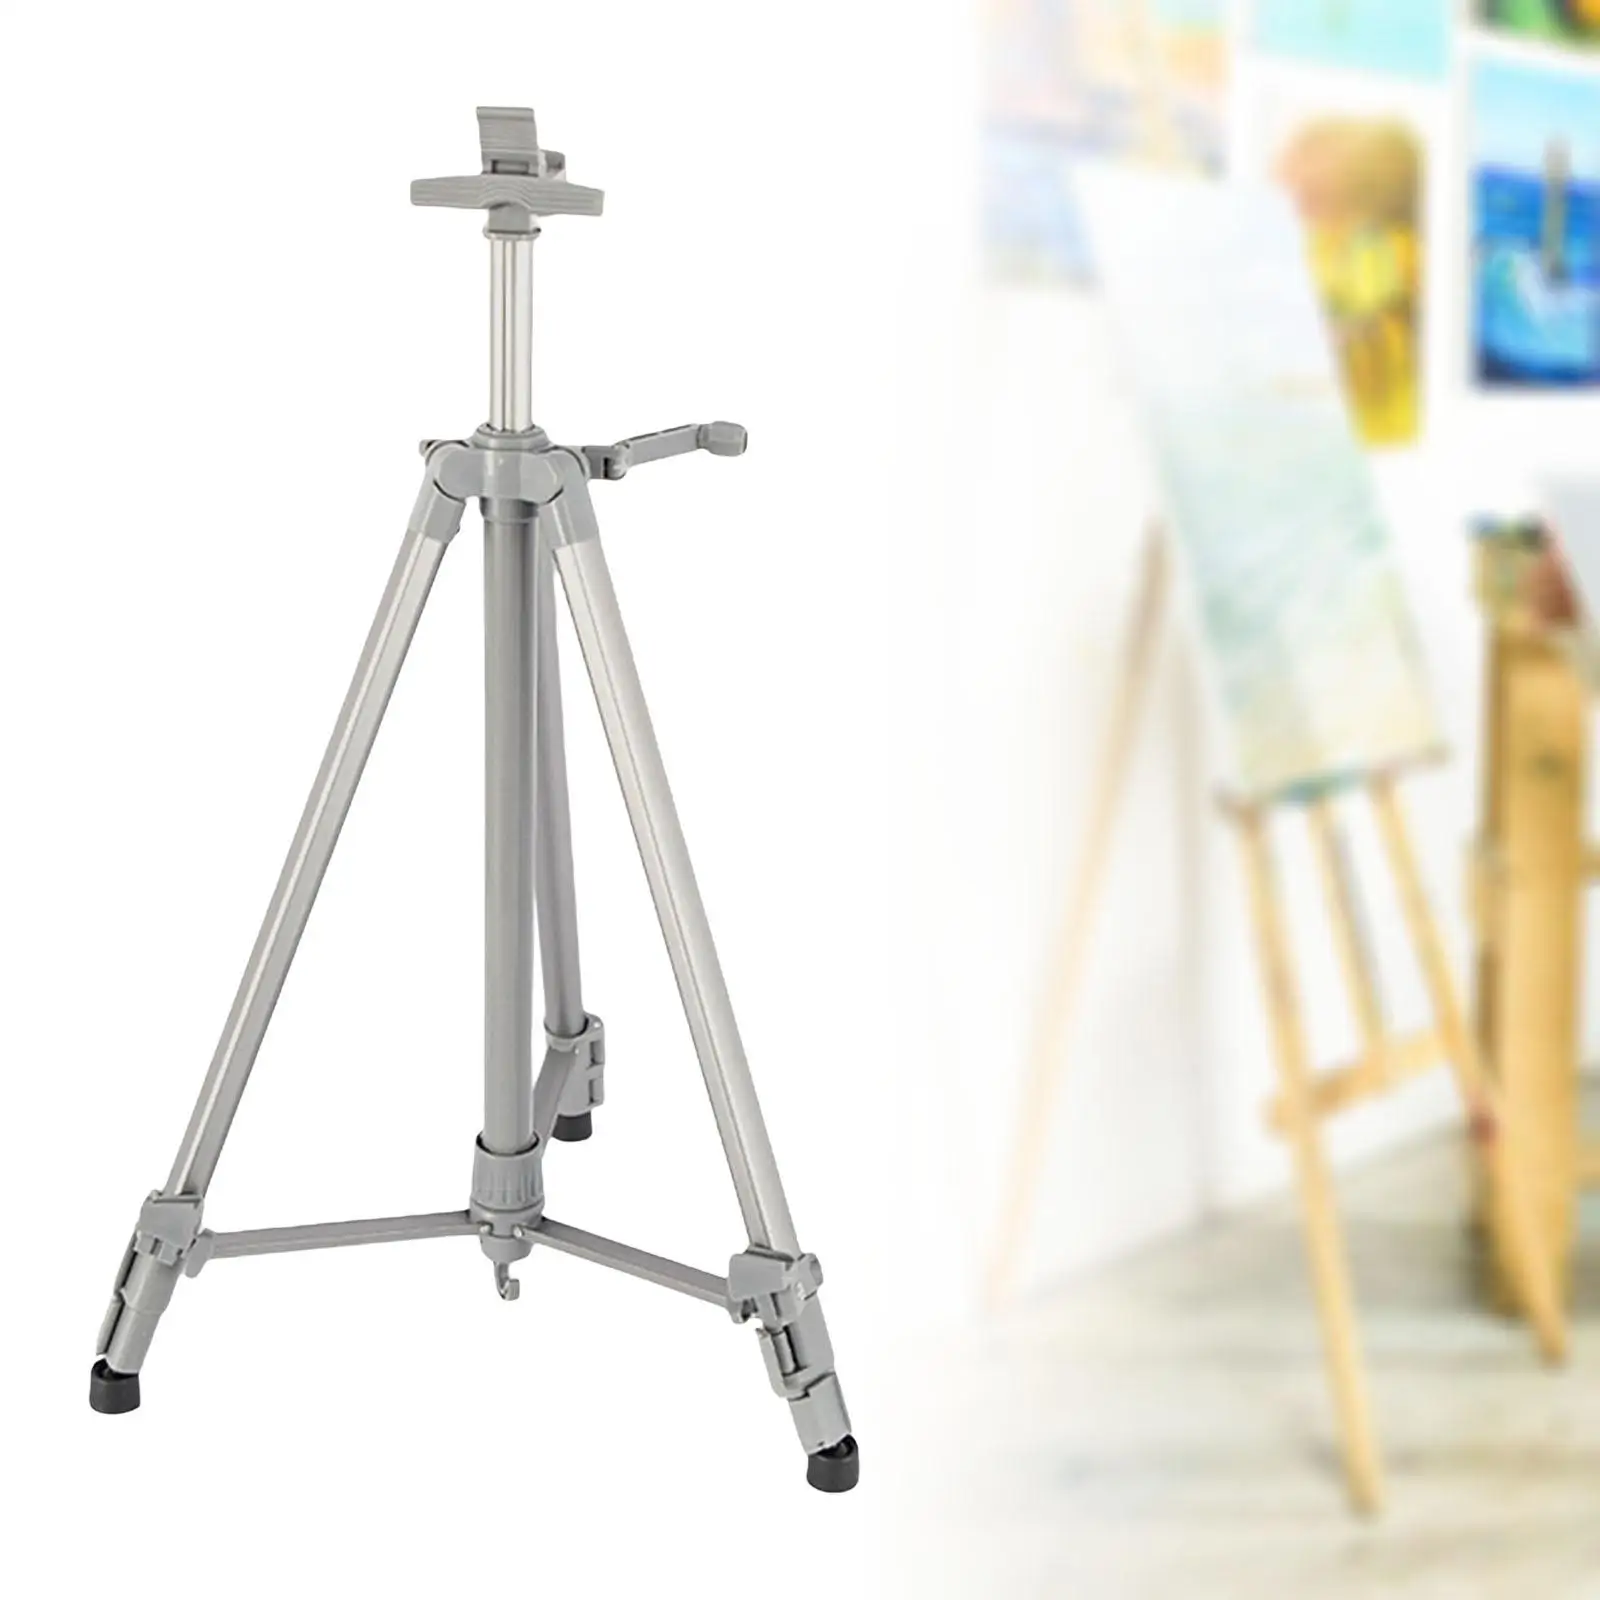 Adjustable Height Painting Easel Drawing Board Sketch Art Artist Tripod Display Stand for Displaying Painting Floor Tabletop